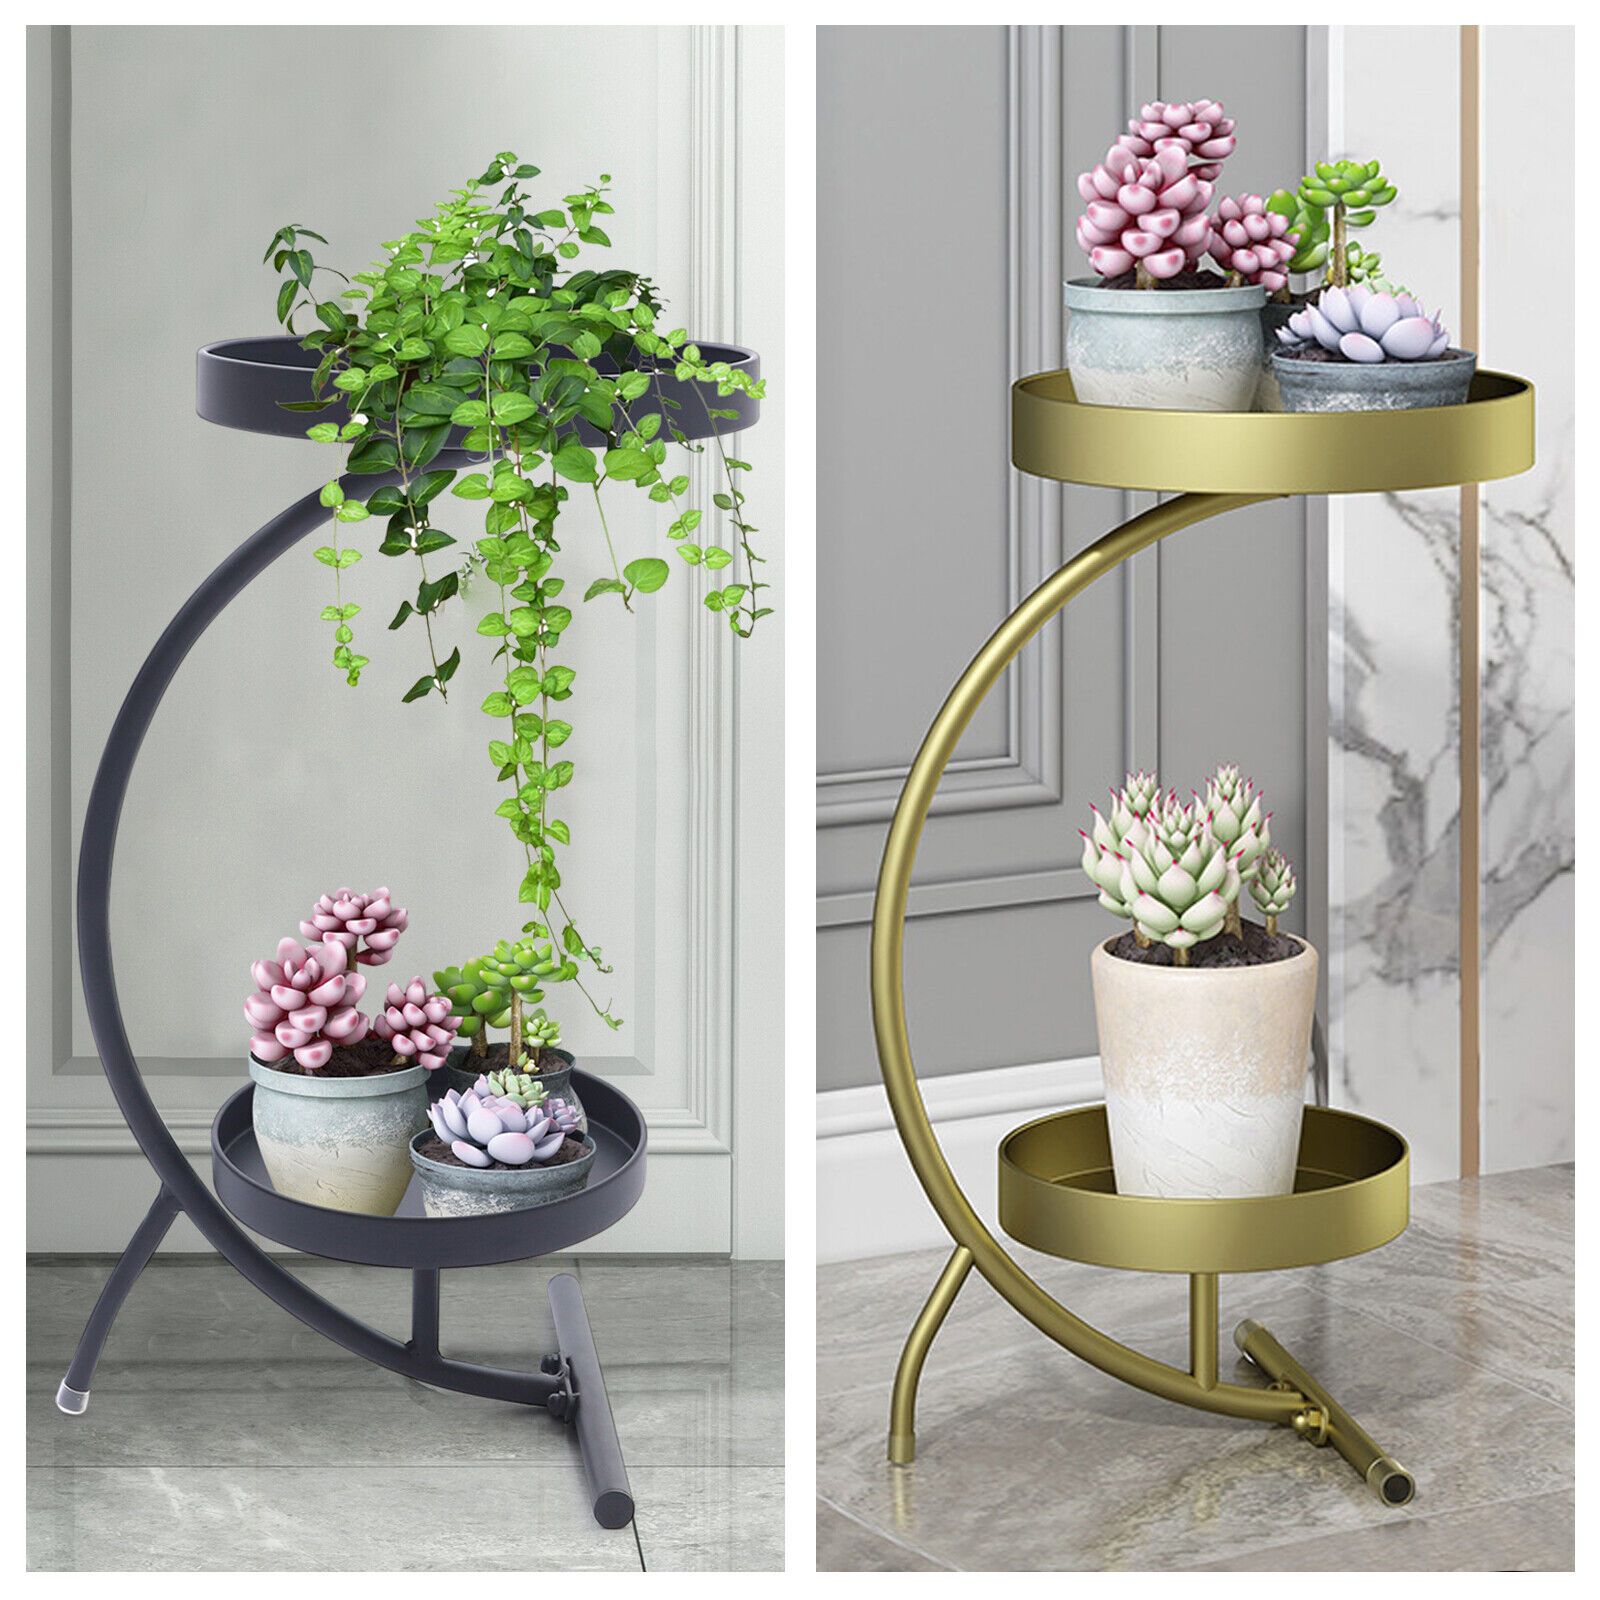 Metal Tall Plant Stand 2 Tier Flower Pot Display Shelf Rack Holder Black  Home | Ebay With Two Tier Plant Stands (View 15 of 15)